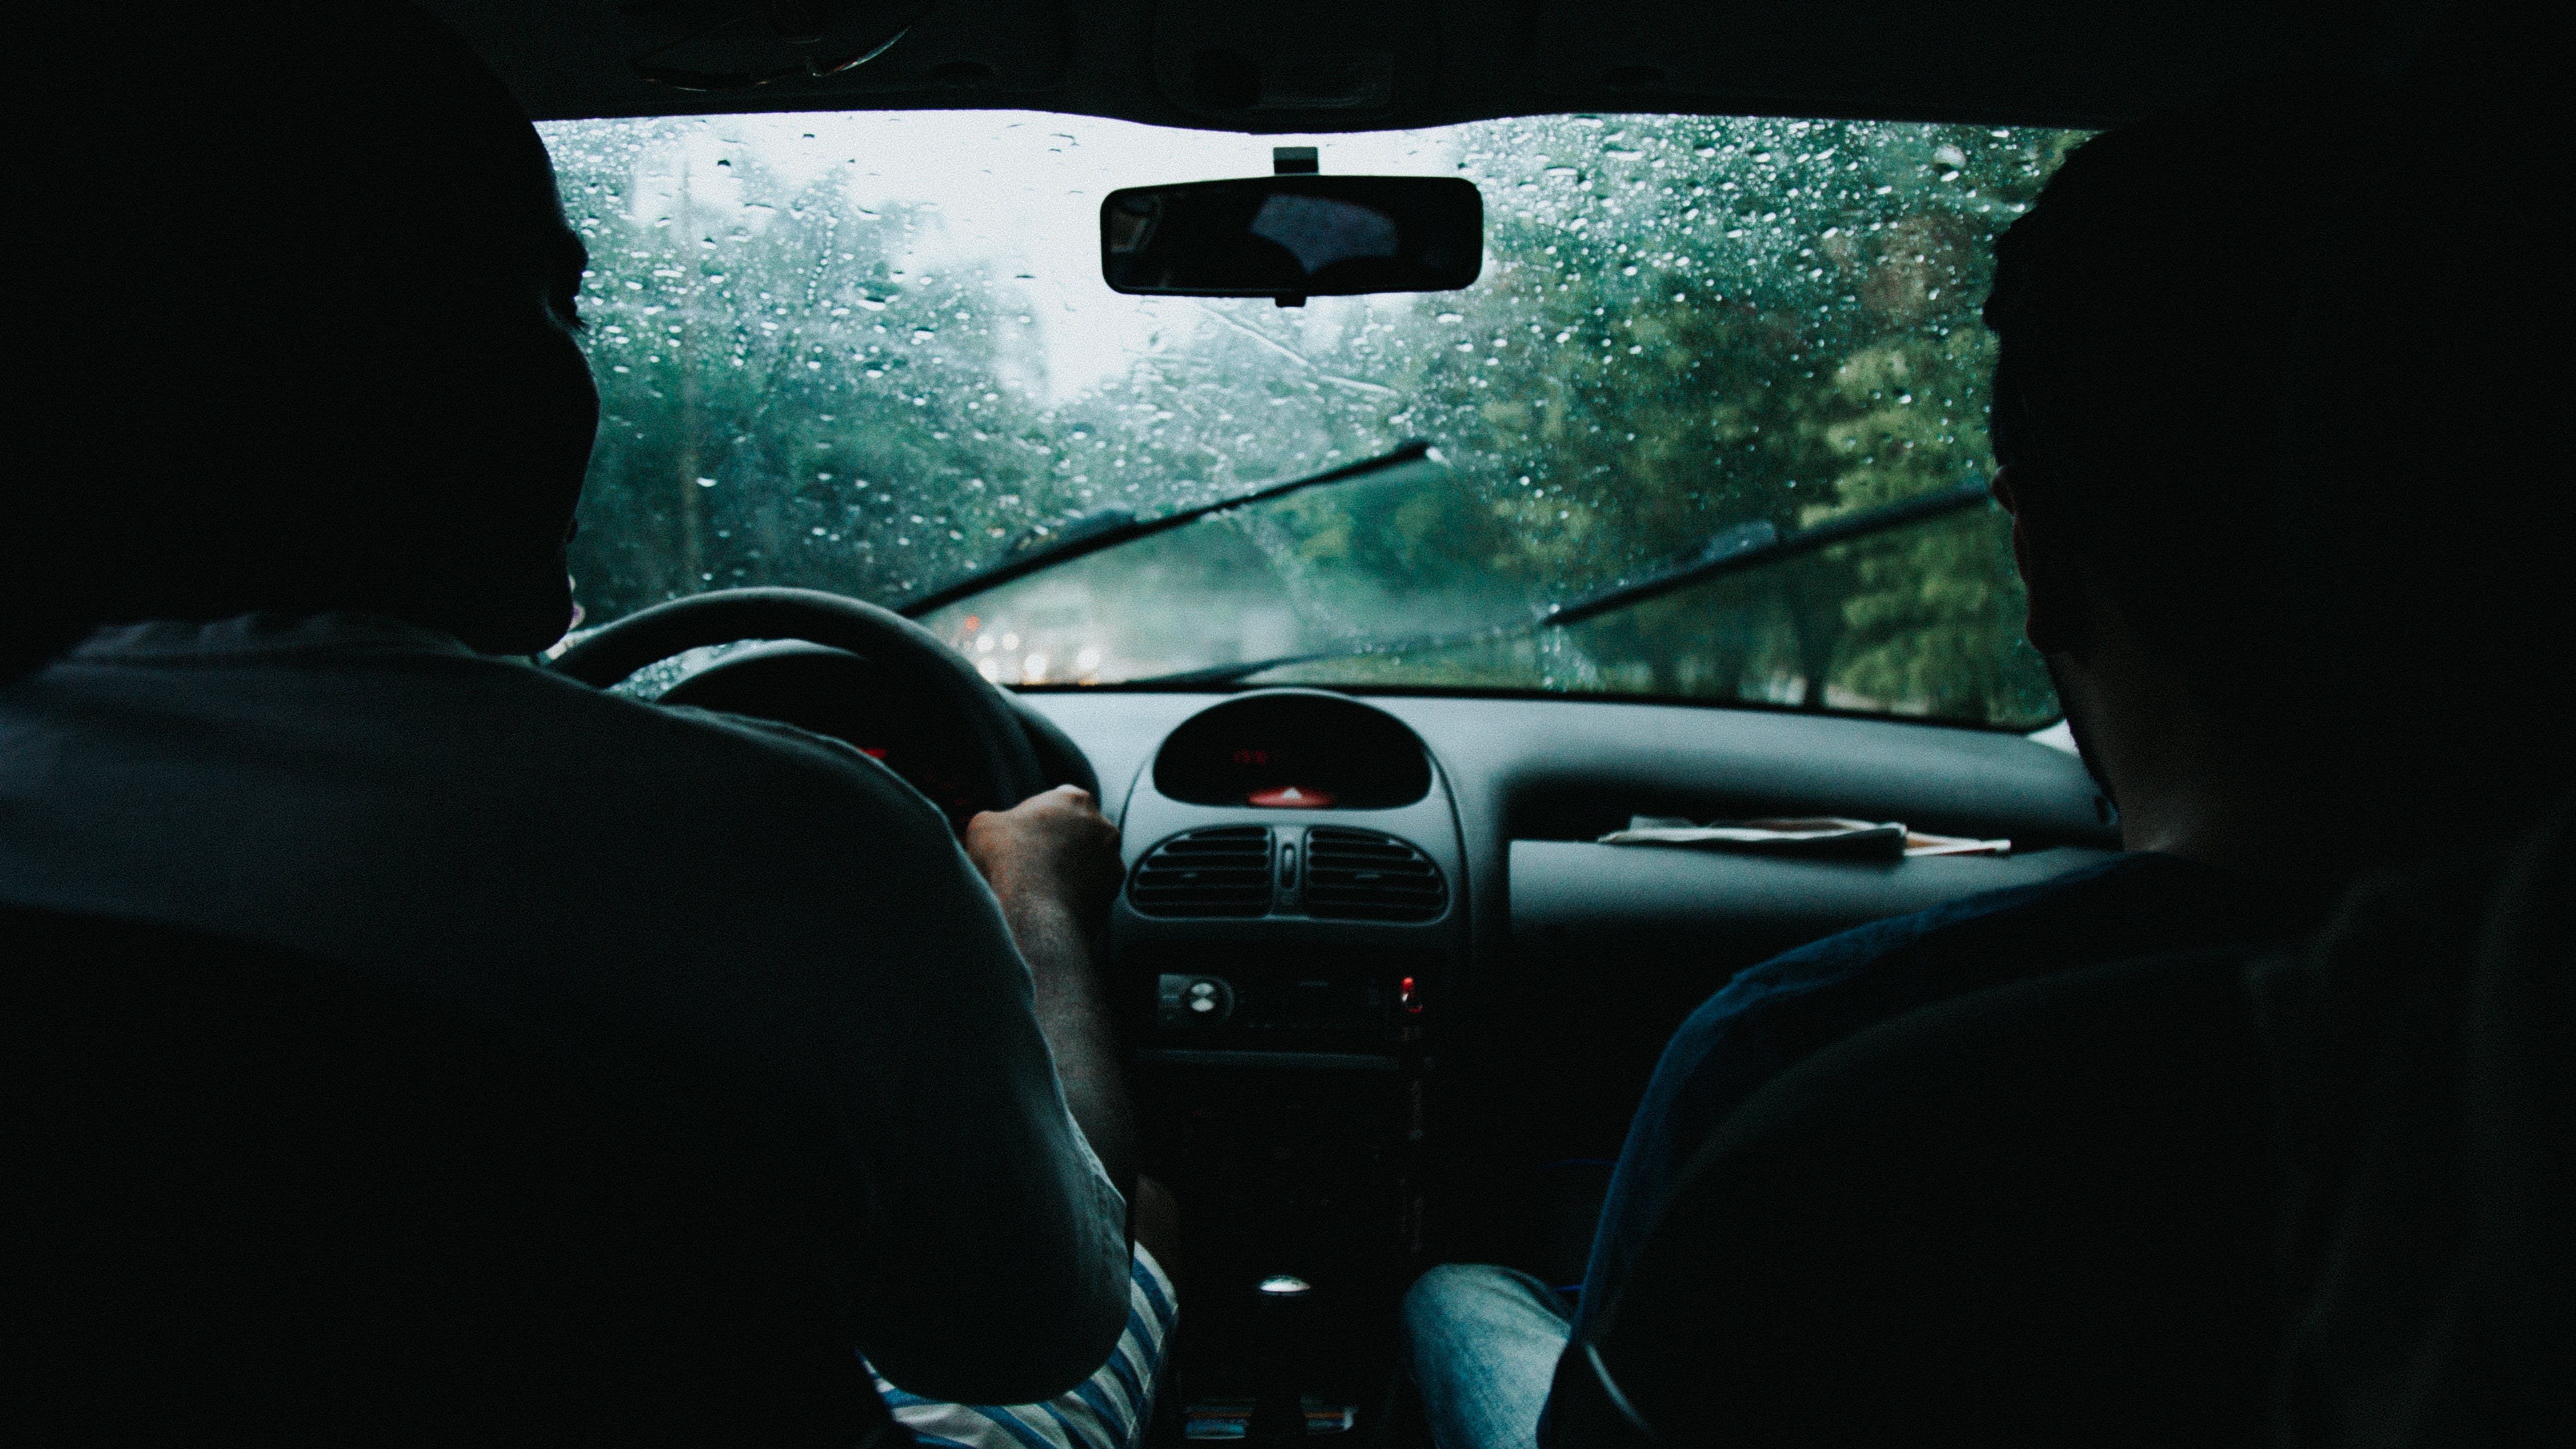 People driving in bad weather | Source: Pexels